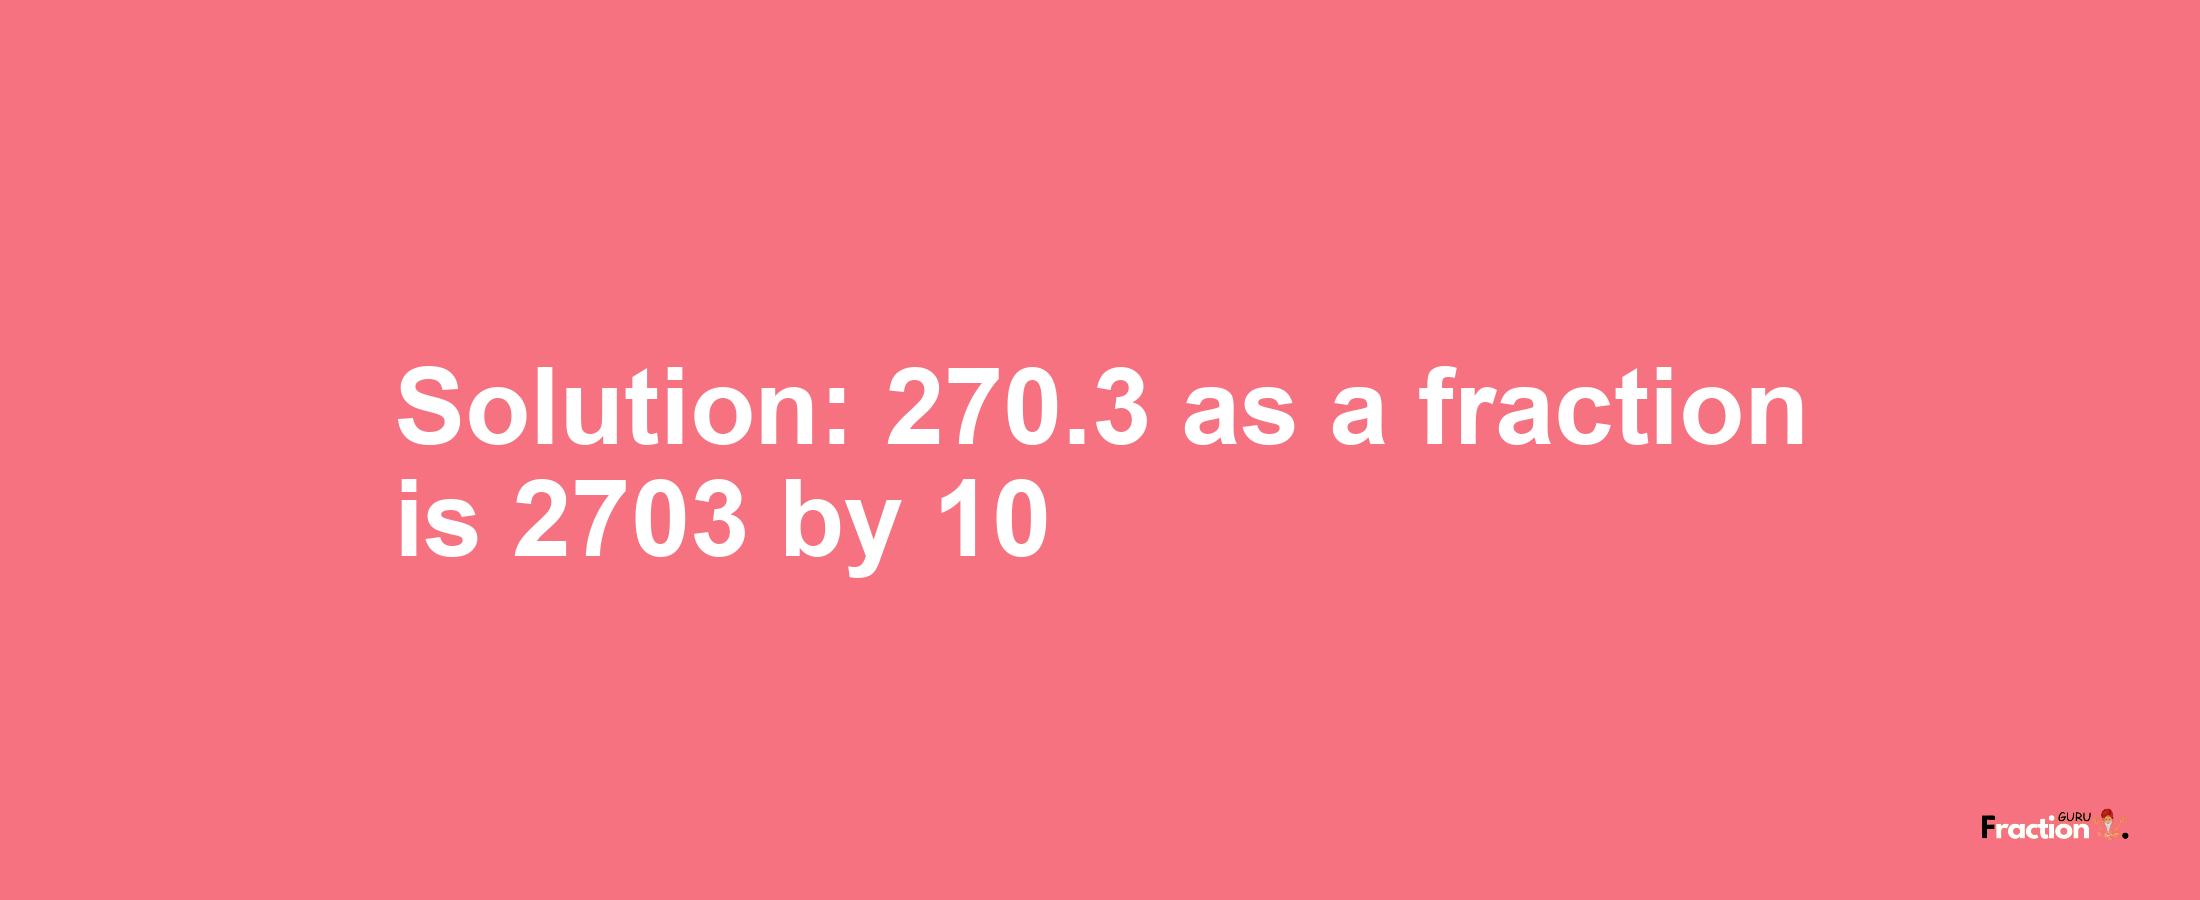 Solution:270.3 as a fraction is 2703/10